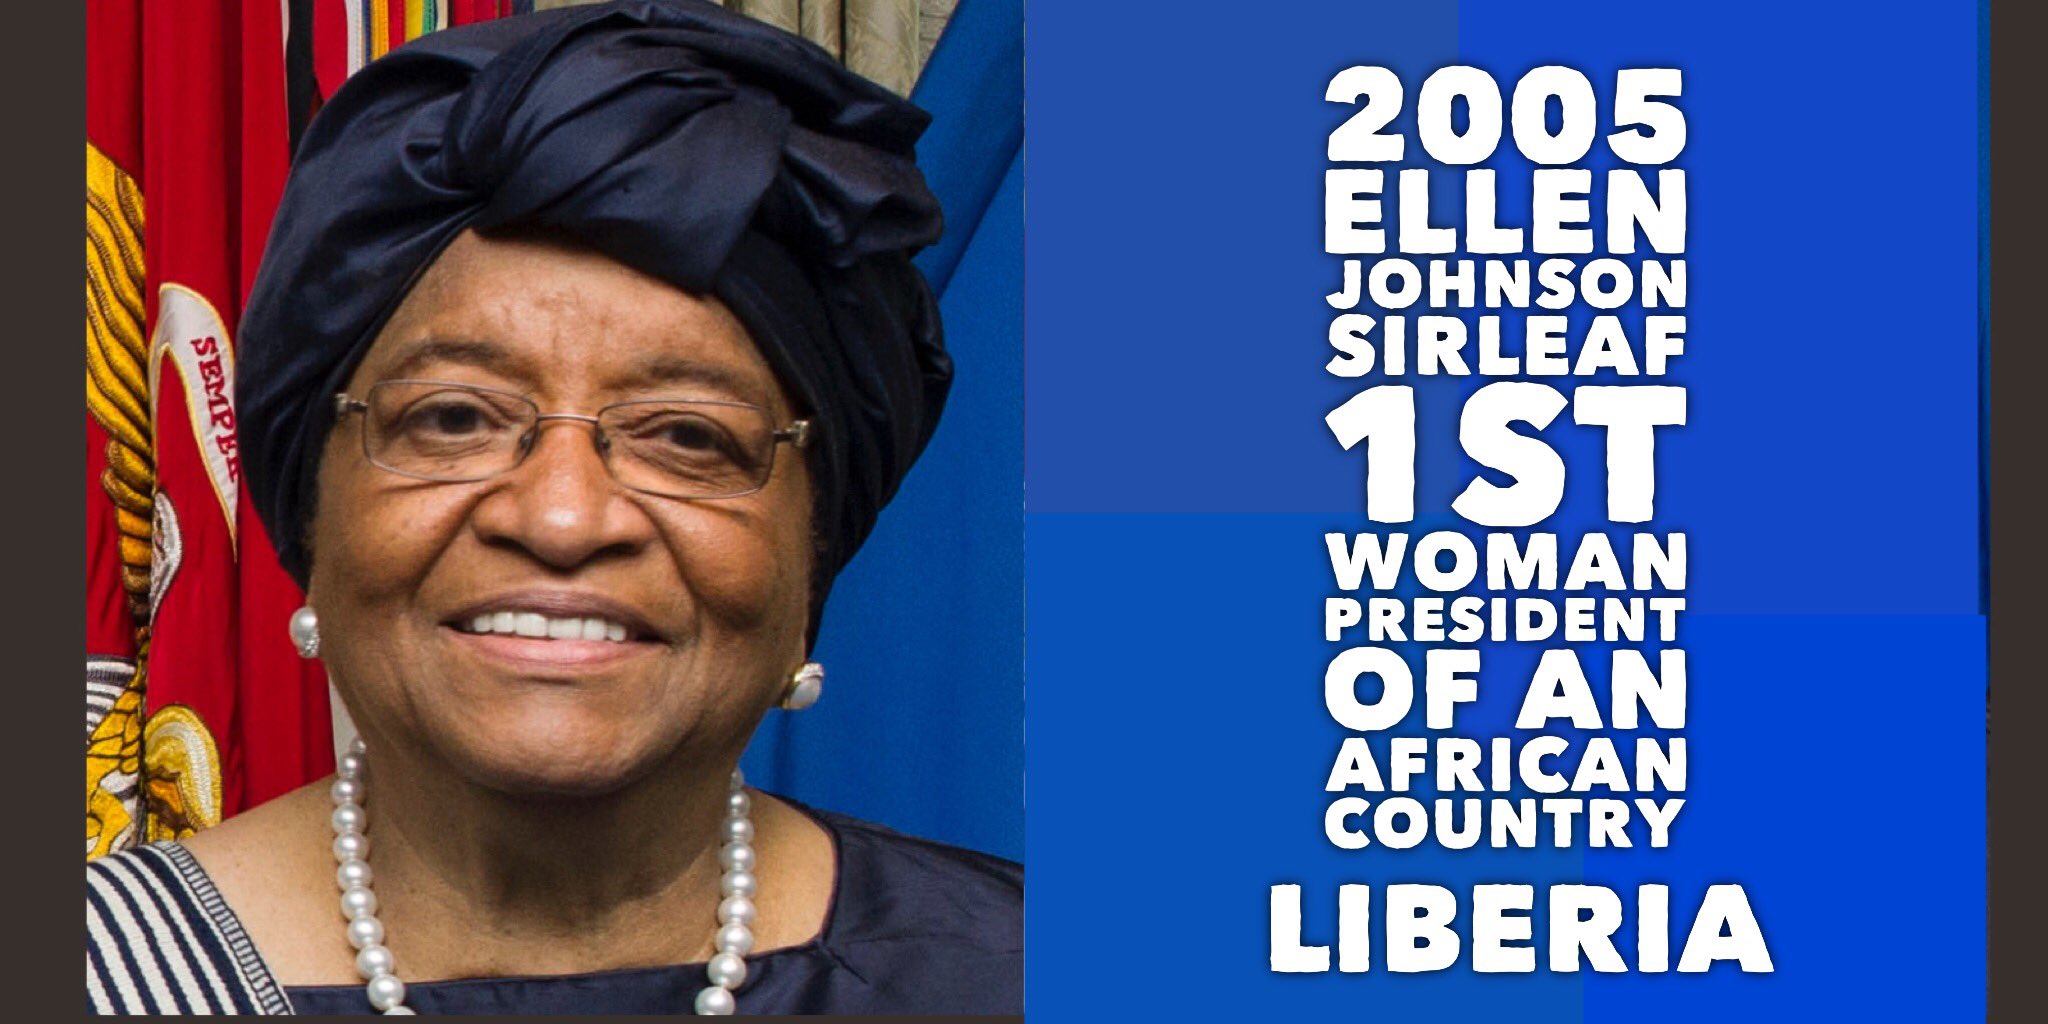 Gavin Duffy on Twitter: "#OnThisDay 2005 – Ellen Johnson Sirleaf is elected president of Liberia and becomes the first woman to lead an African country. https://t.co/R623mFJDeU" / Twitter